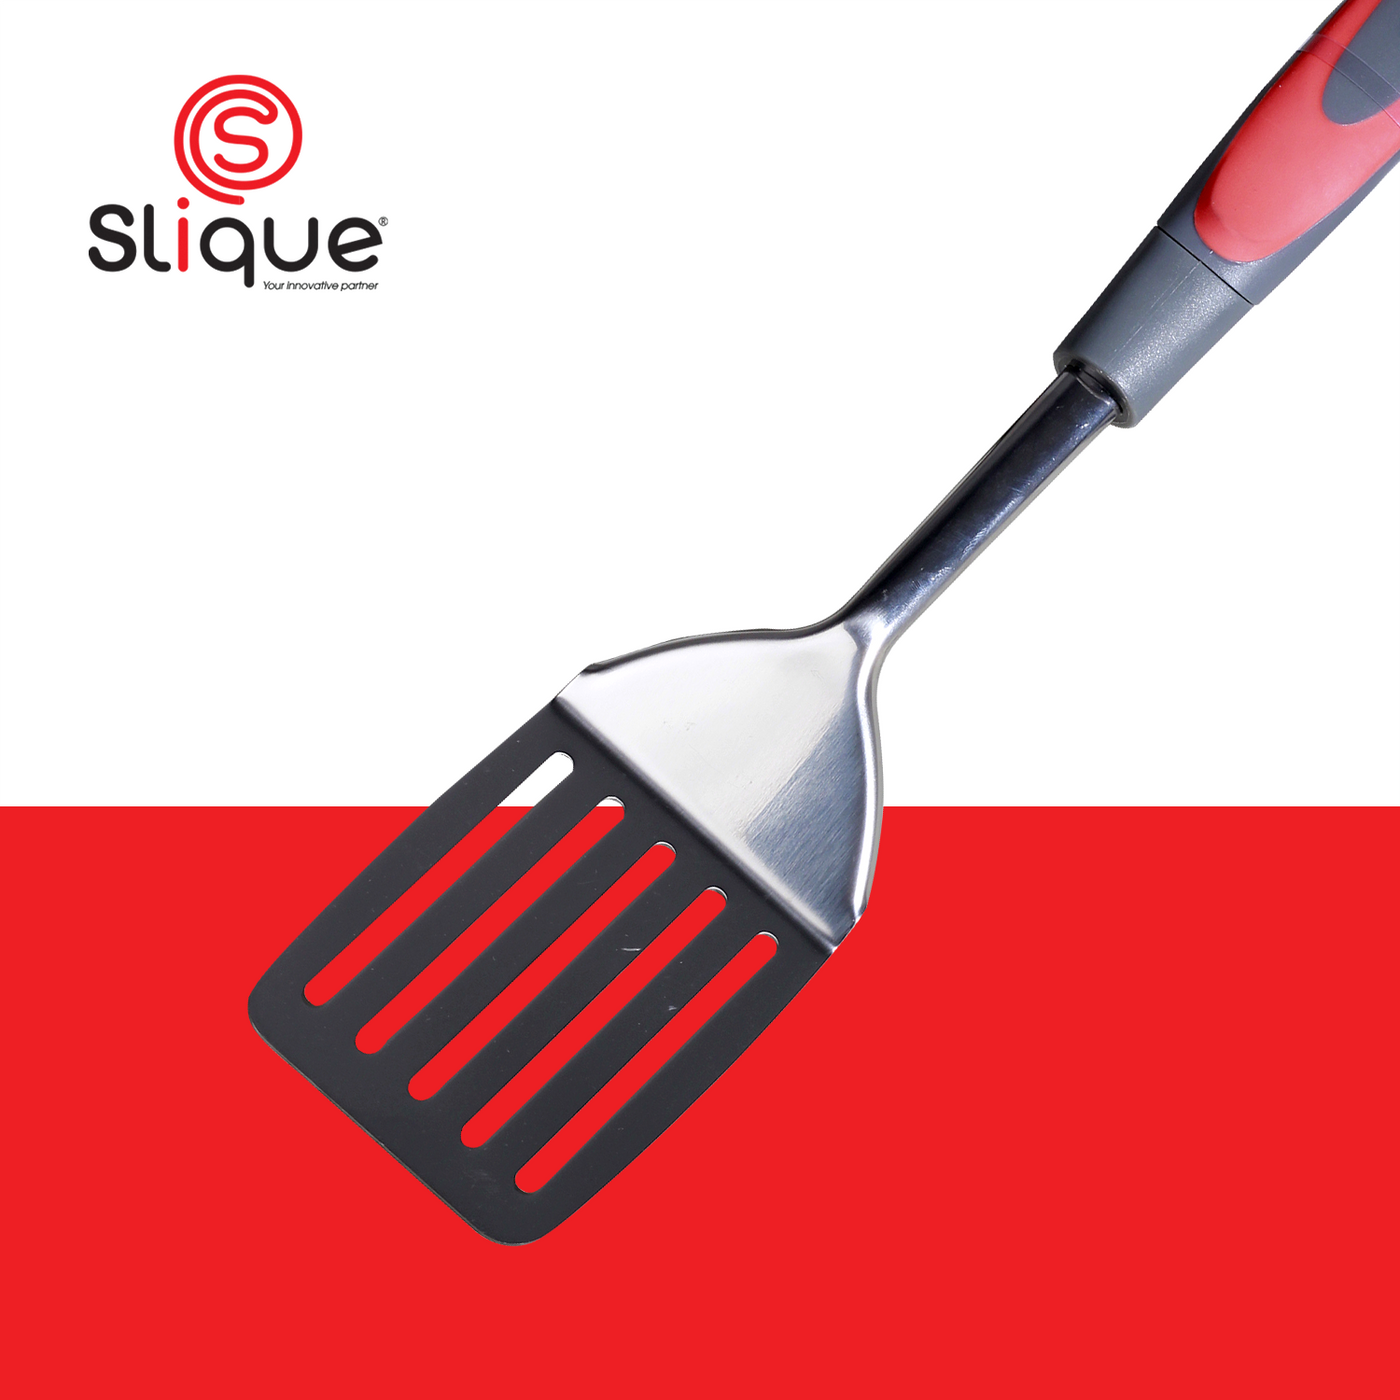 SLIQUE Premium 18/8 Stainless Steel Slotted Turner TPR Silicone Handle Kitchen Essentials Amazing Gift Idea For Any Occasion! (Red)